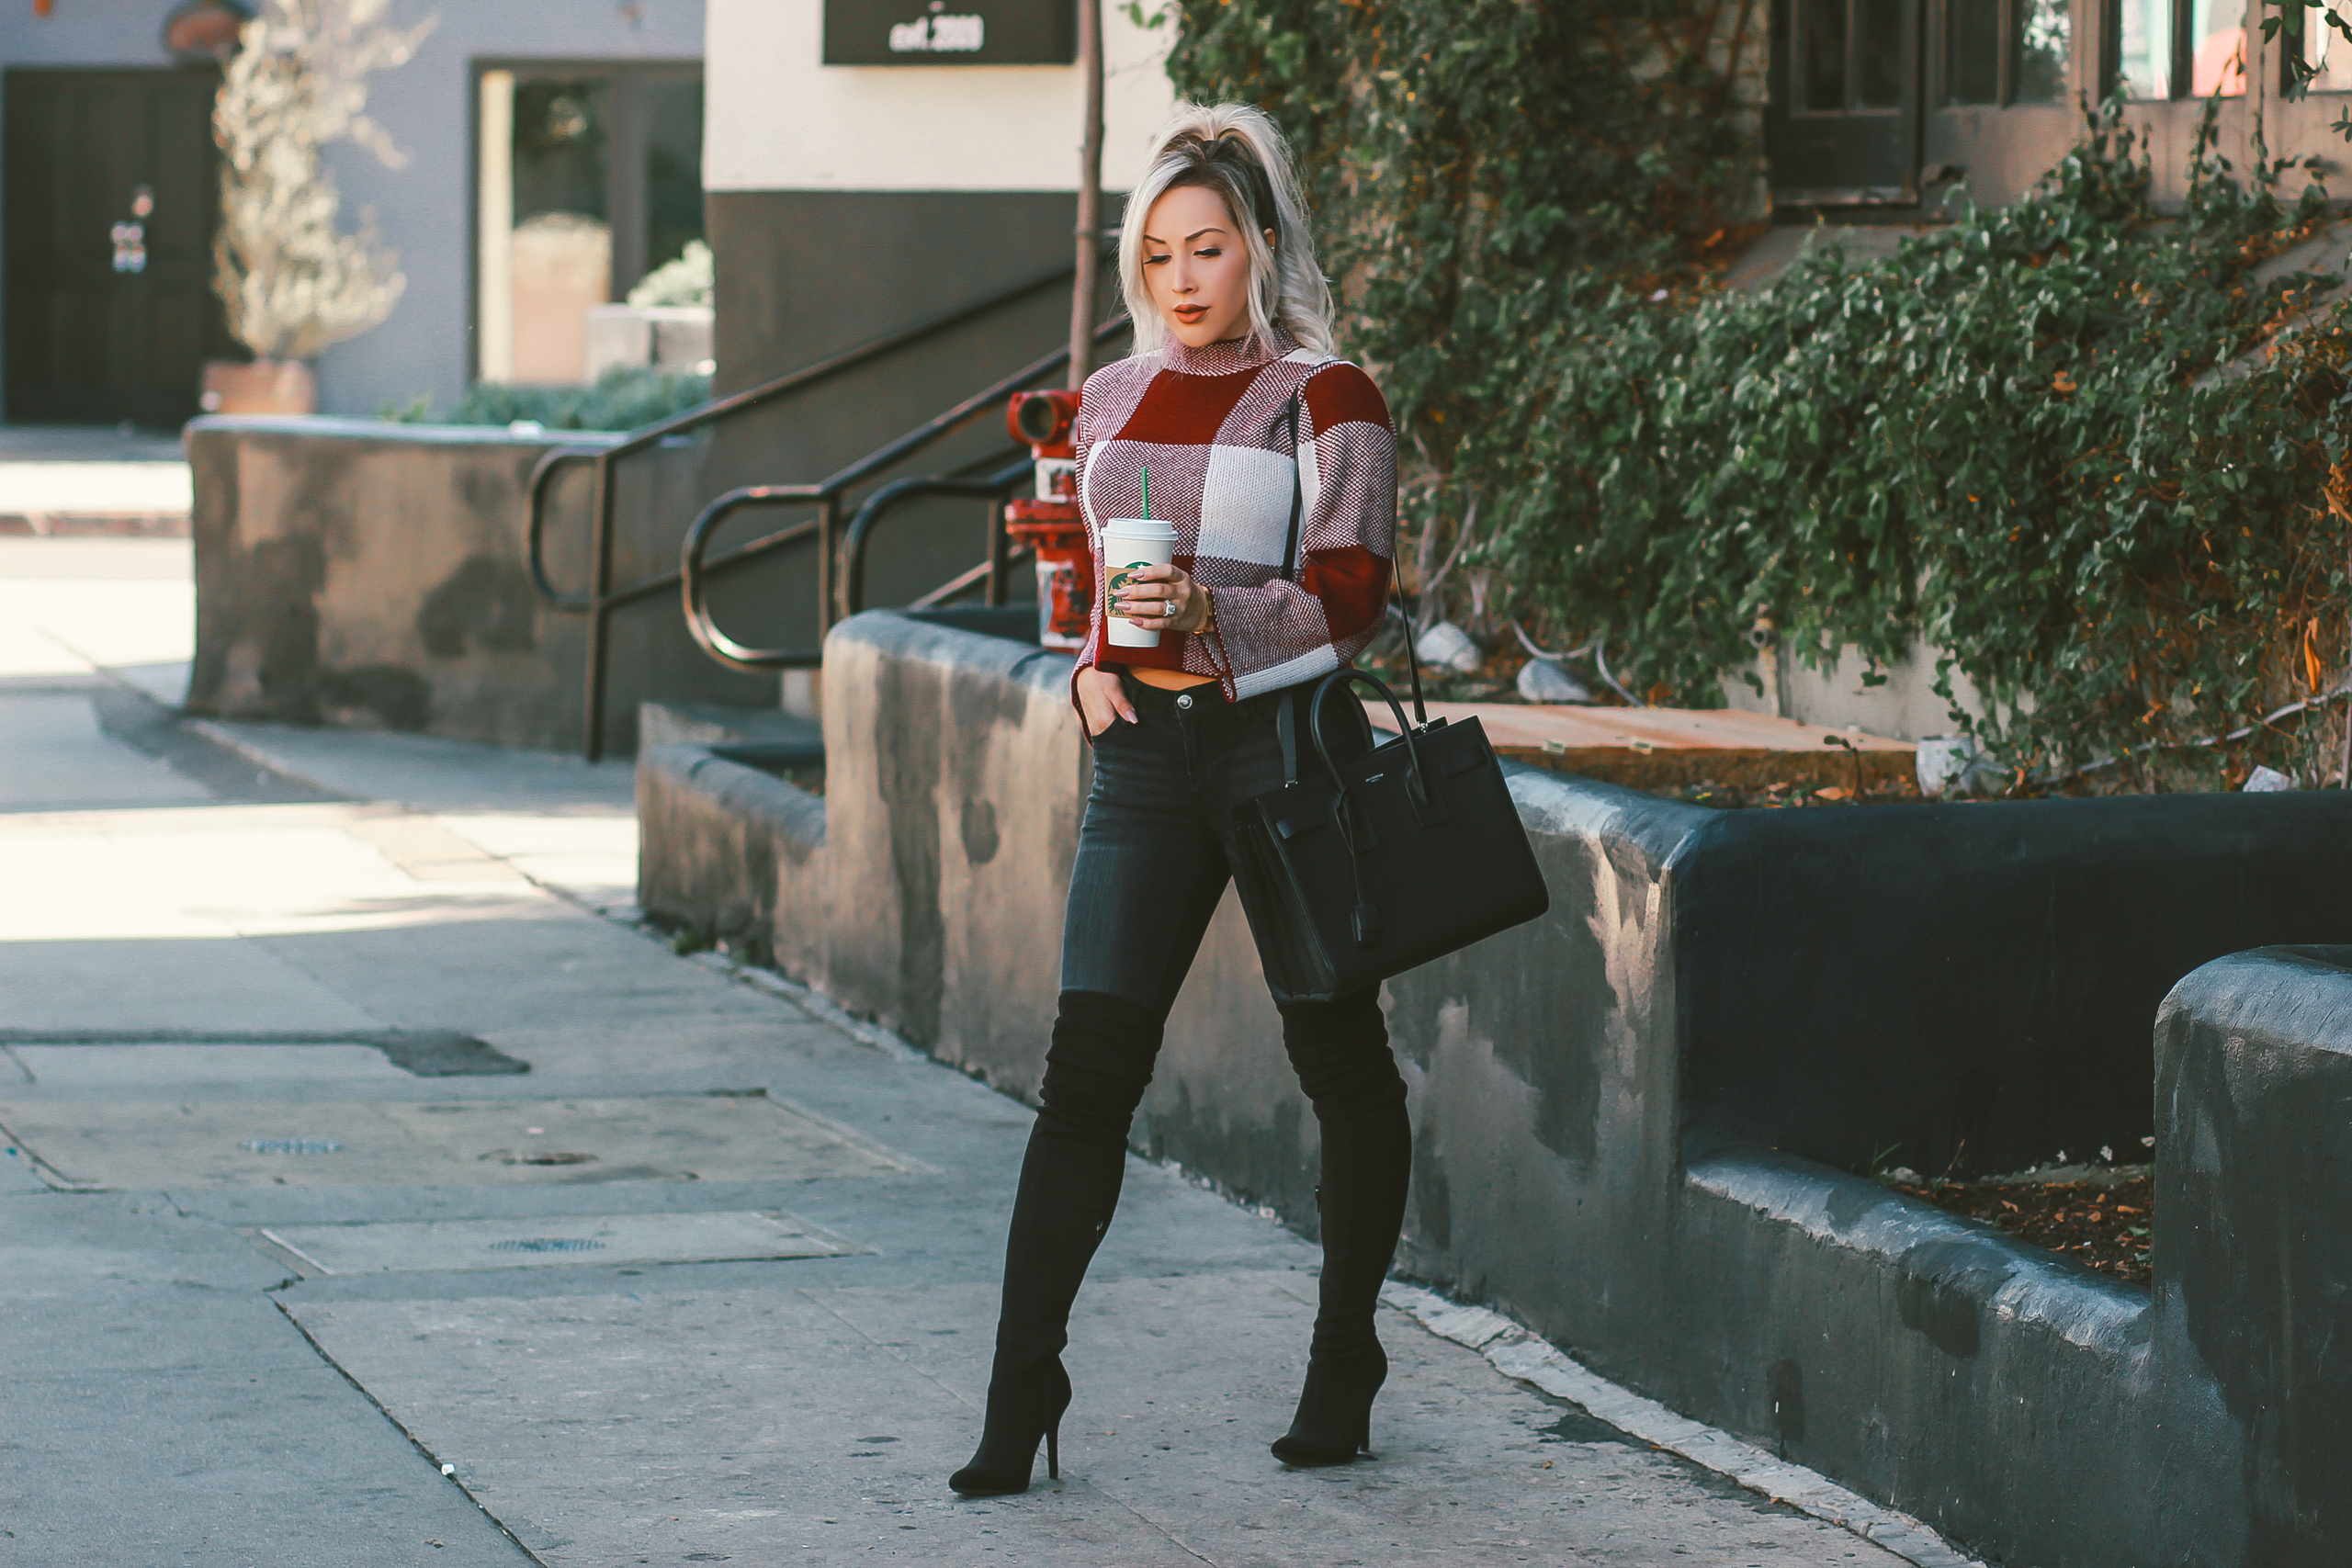 Gingham Cropped Sweater |Black Thigh High Boots, Black Saint Laurent Sac De Jour | Blondie in the City by Hayley Larue